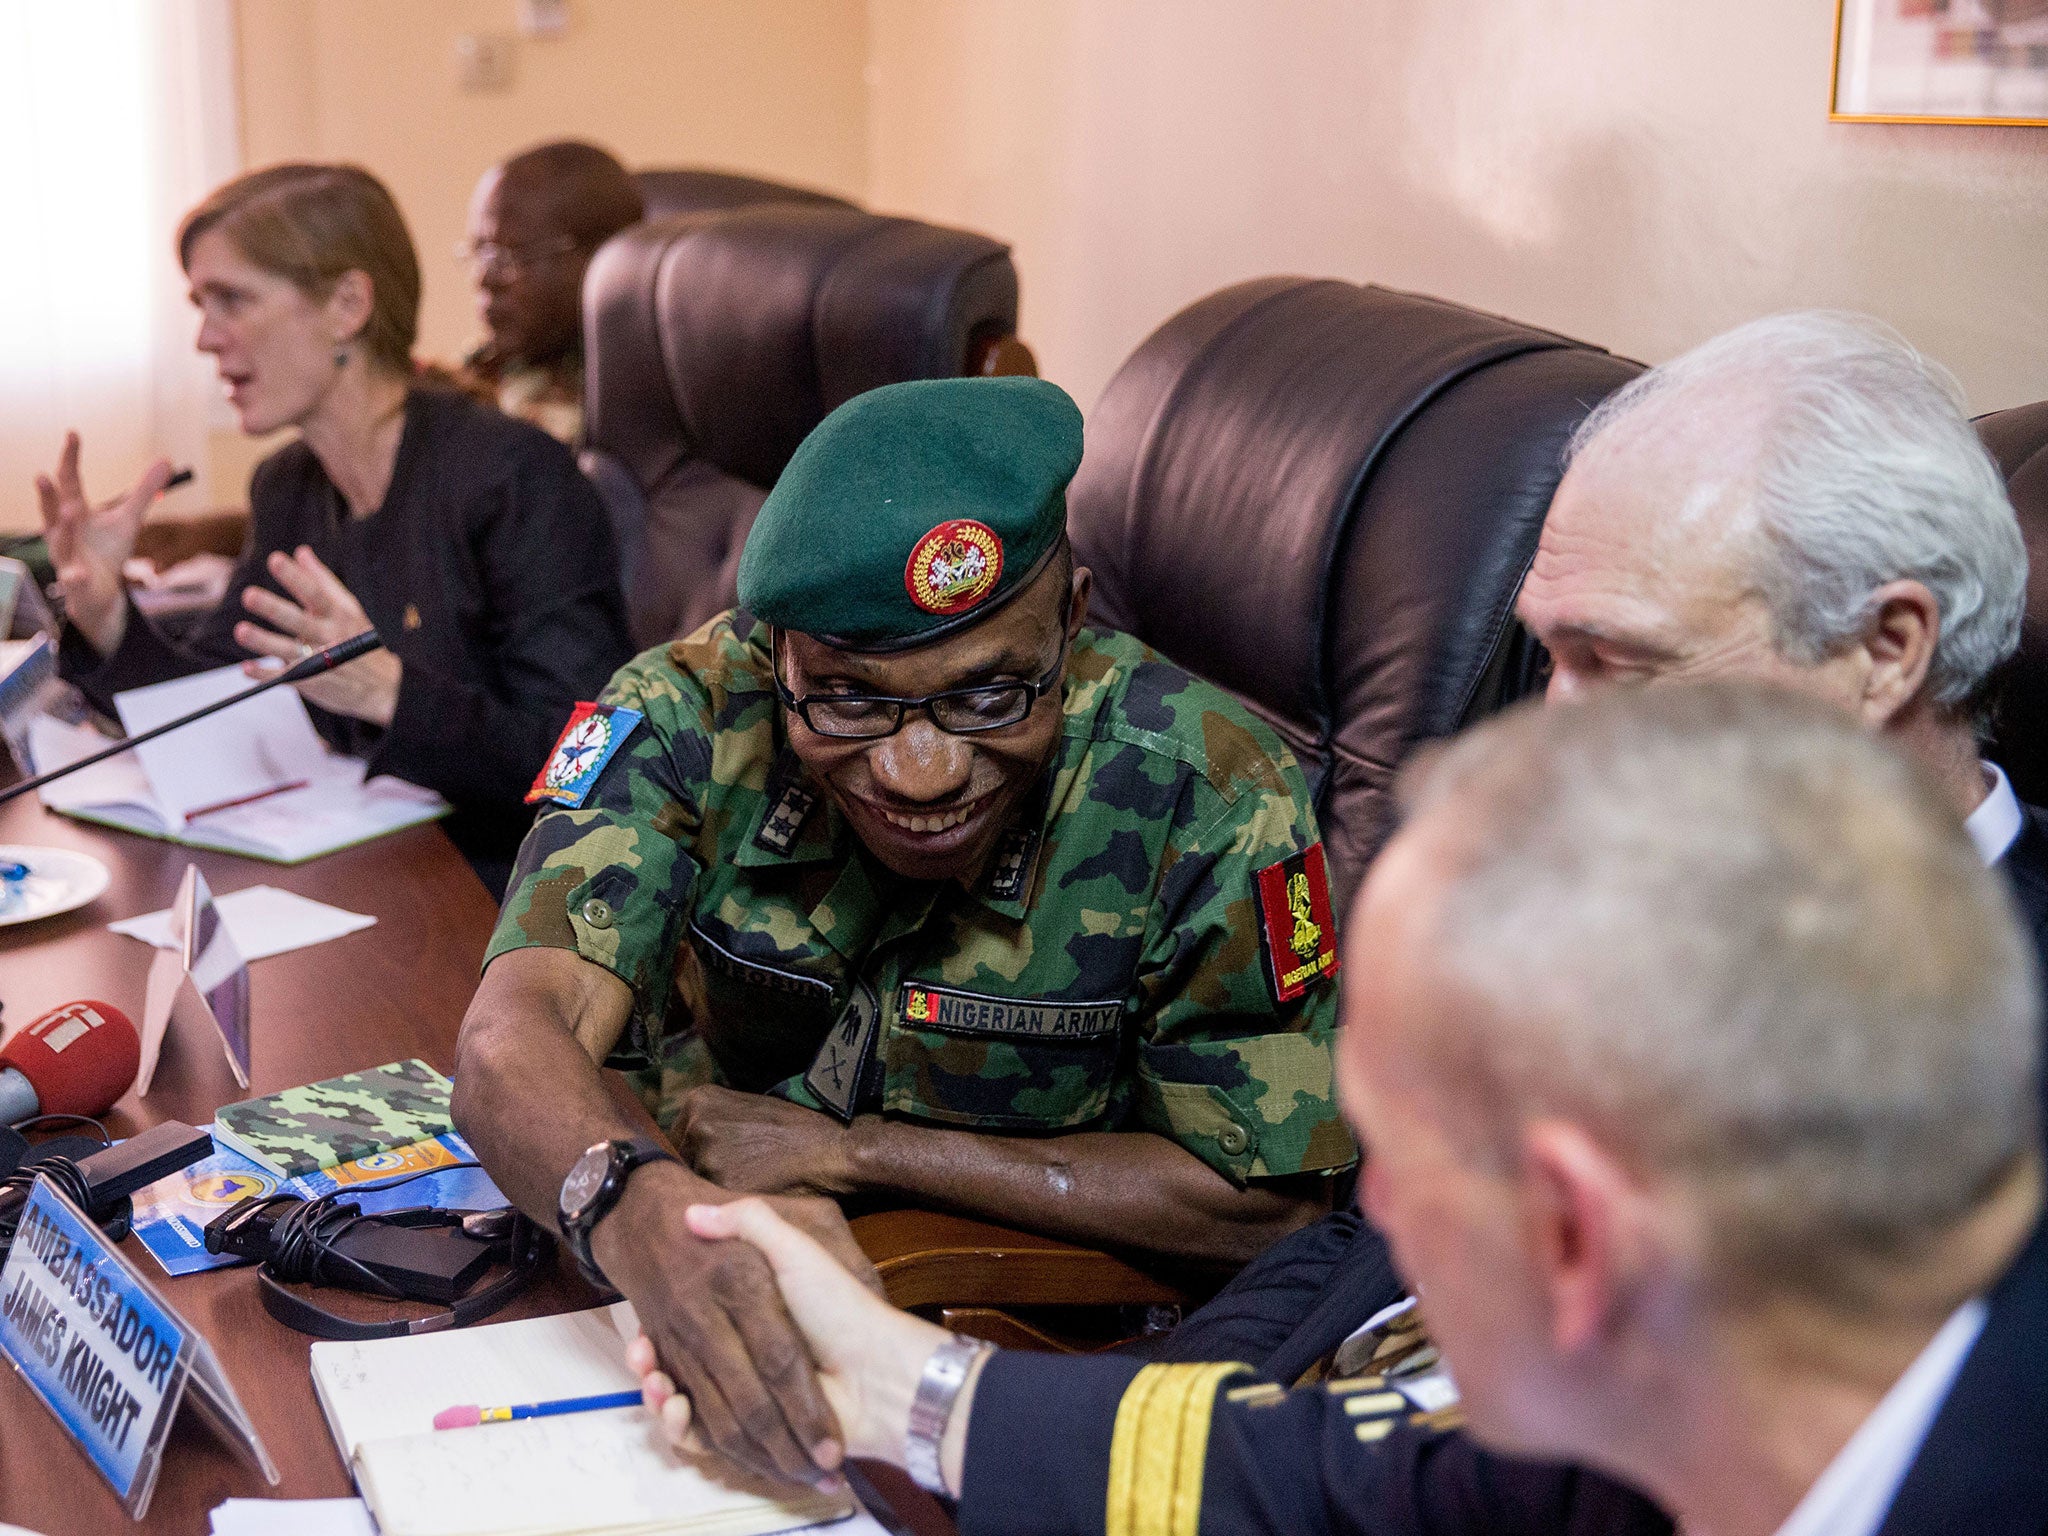 US Ambassador to the United Nations Samantha Power, Multinational Joint Task Force Commander Maj. Gen. Lamidi Adeosun and United States Special Operations Command Africa Commander Brig. Gen. Donald Bolduc during a meeting in N'Djamena, Chad, Wednesday, April 20, 2016.